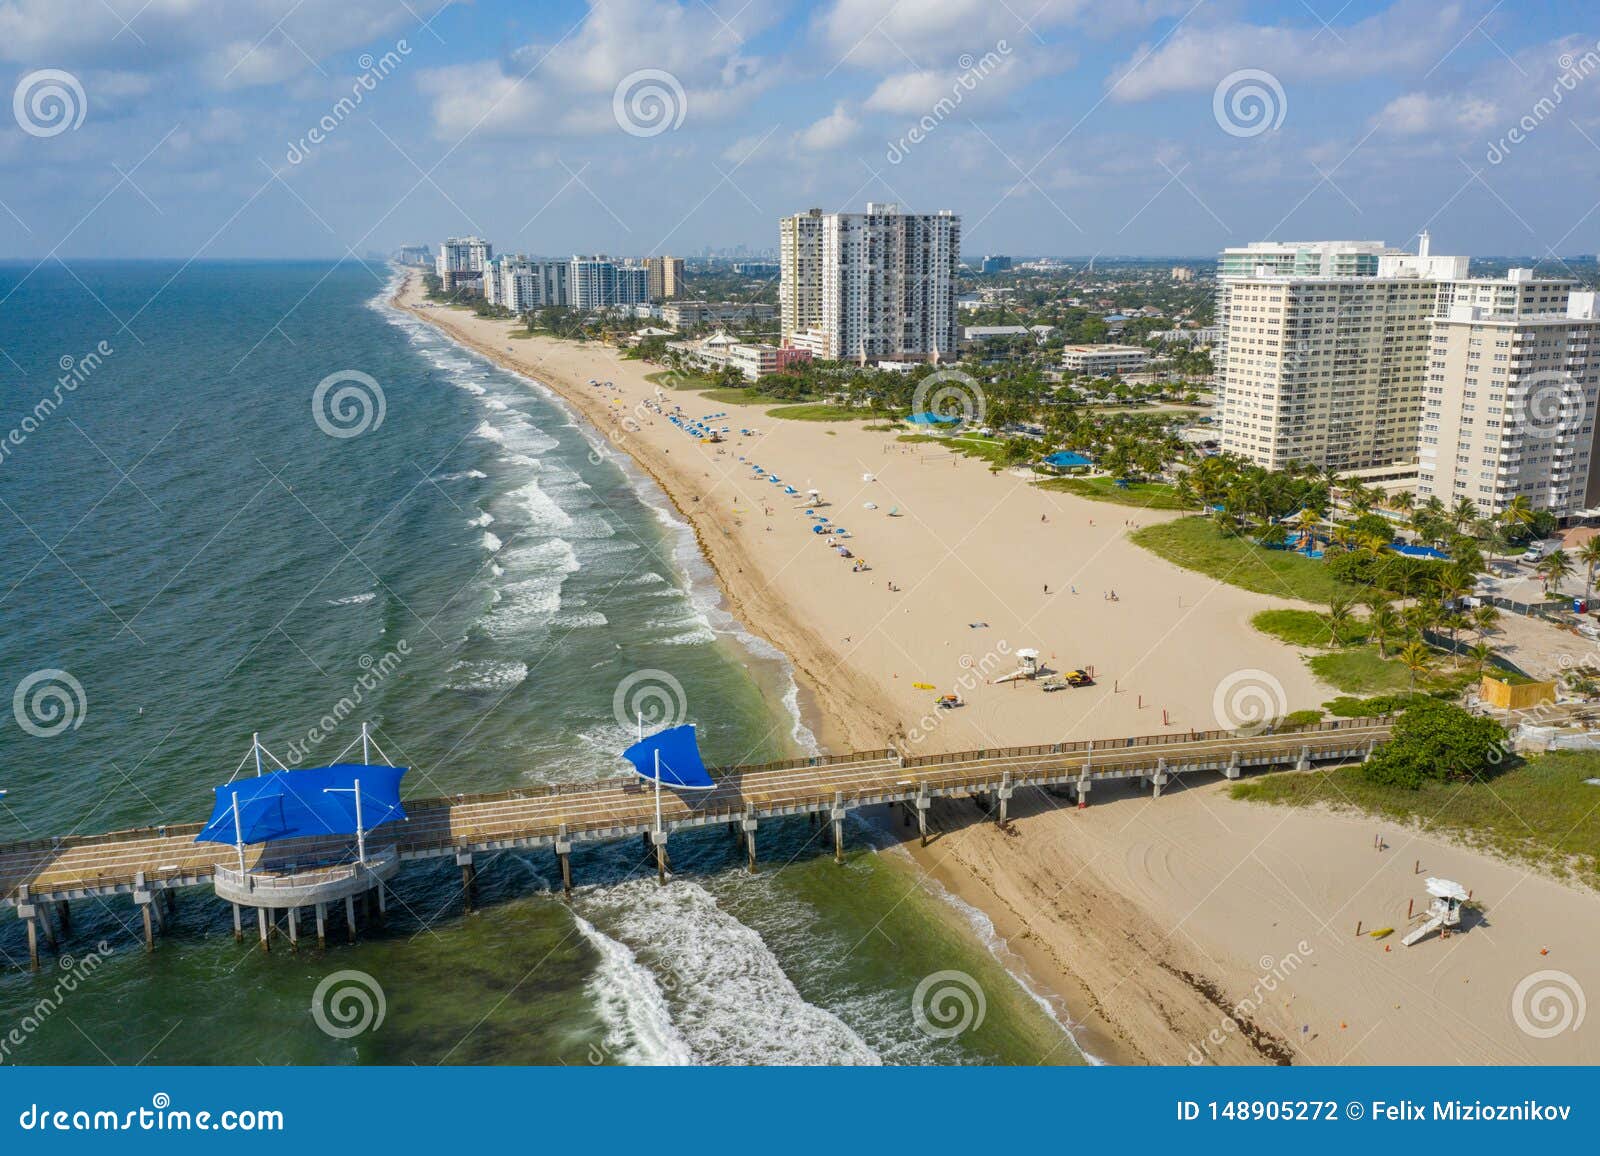 aerial shot of pompano beach for post card